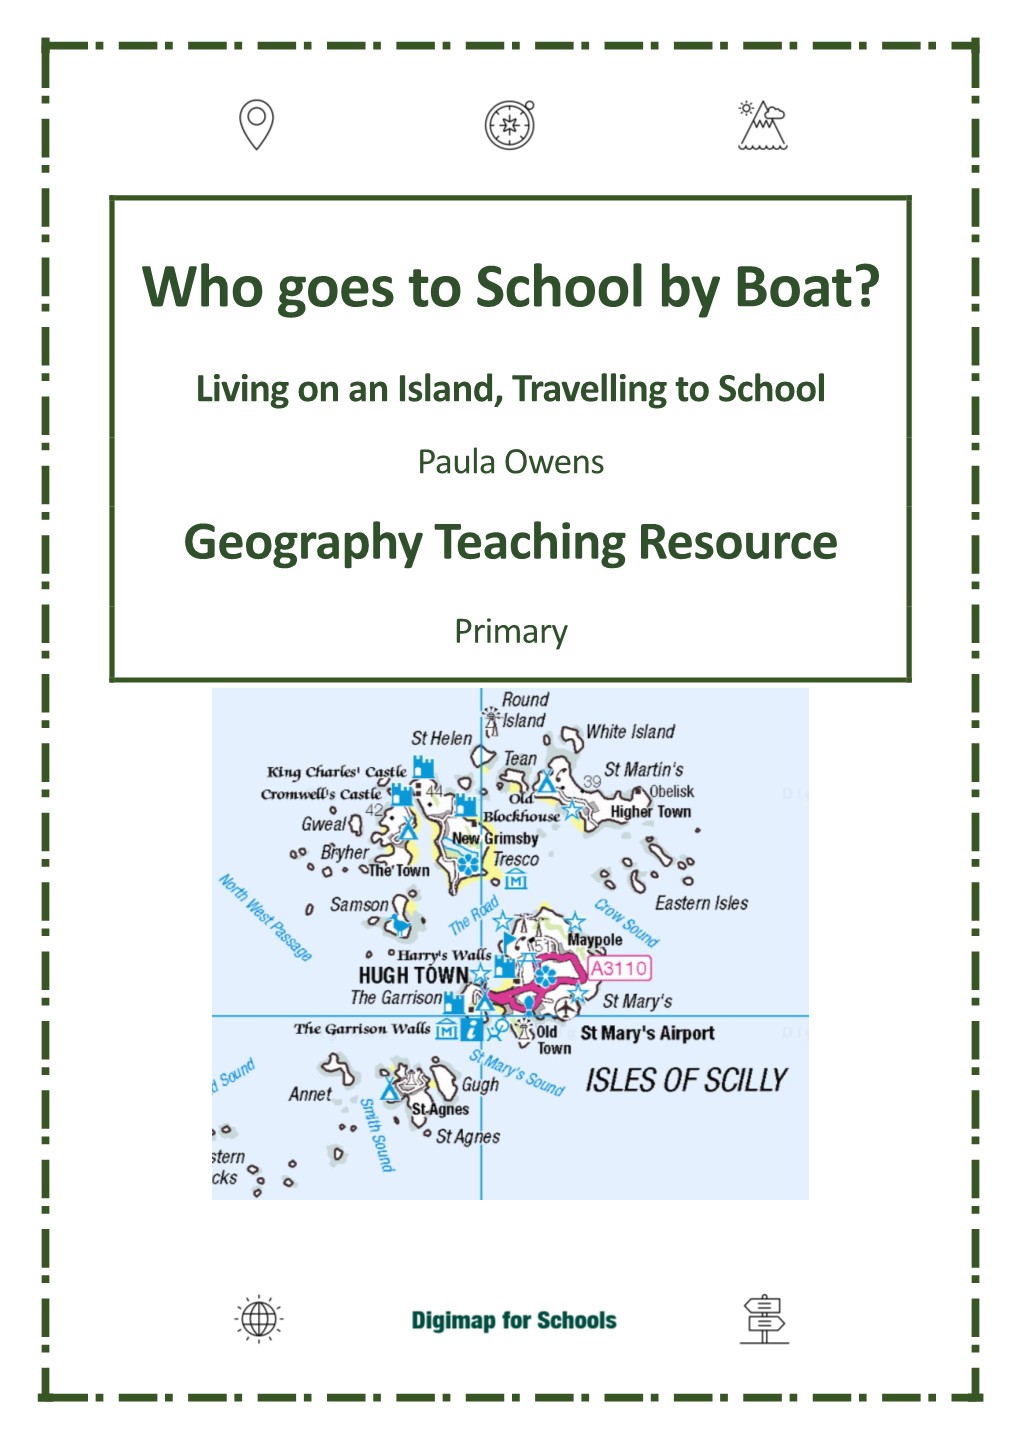 Who Goes to School by Boat?